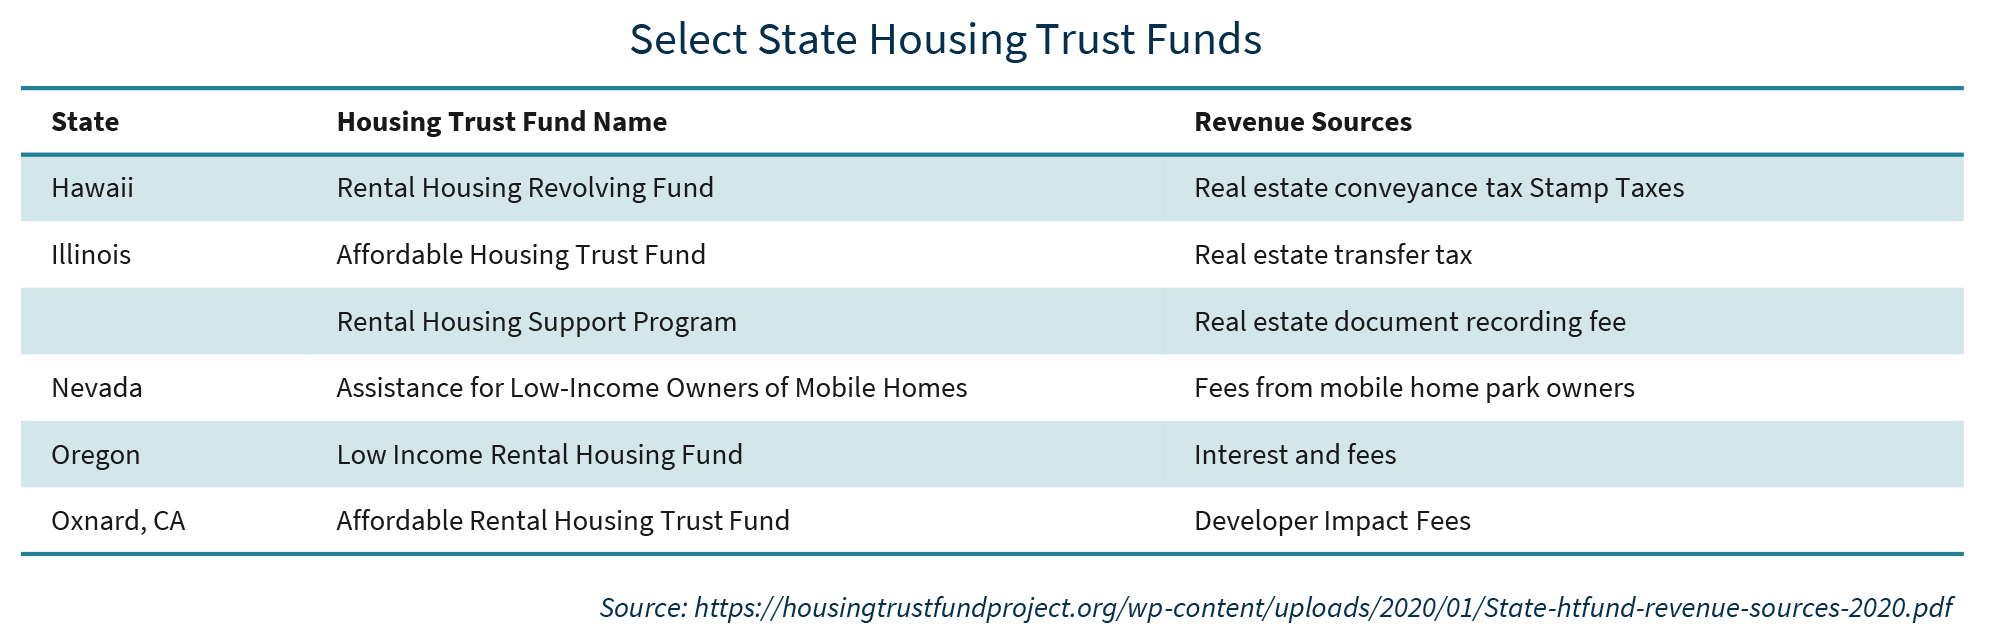 Select State Housing Trust Funds